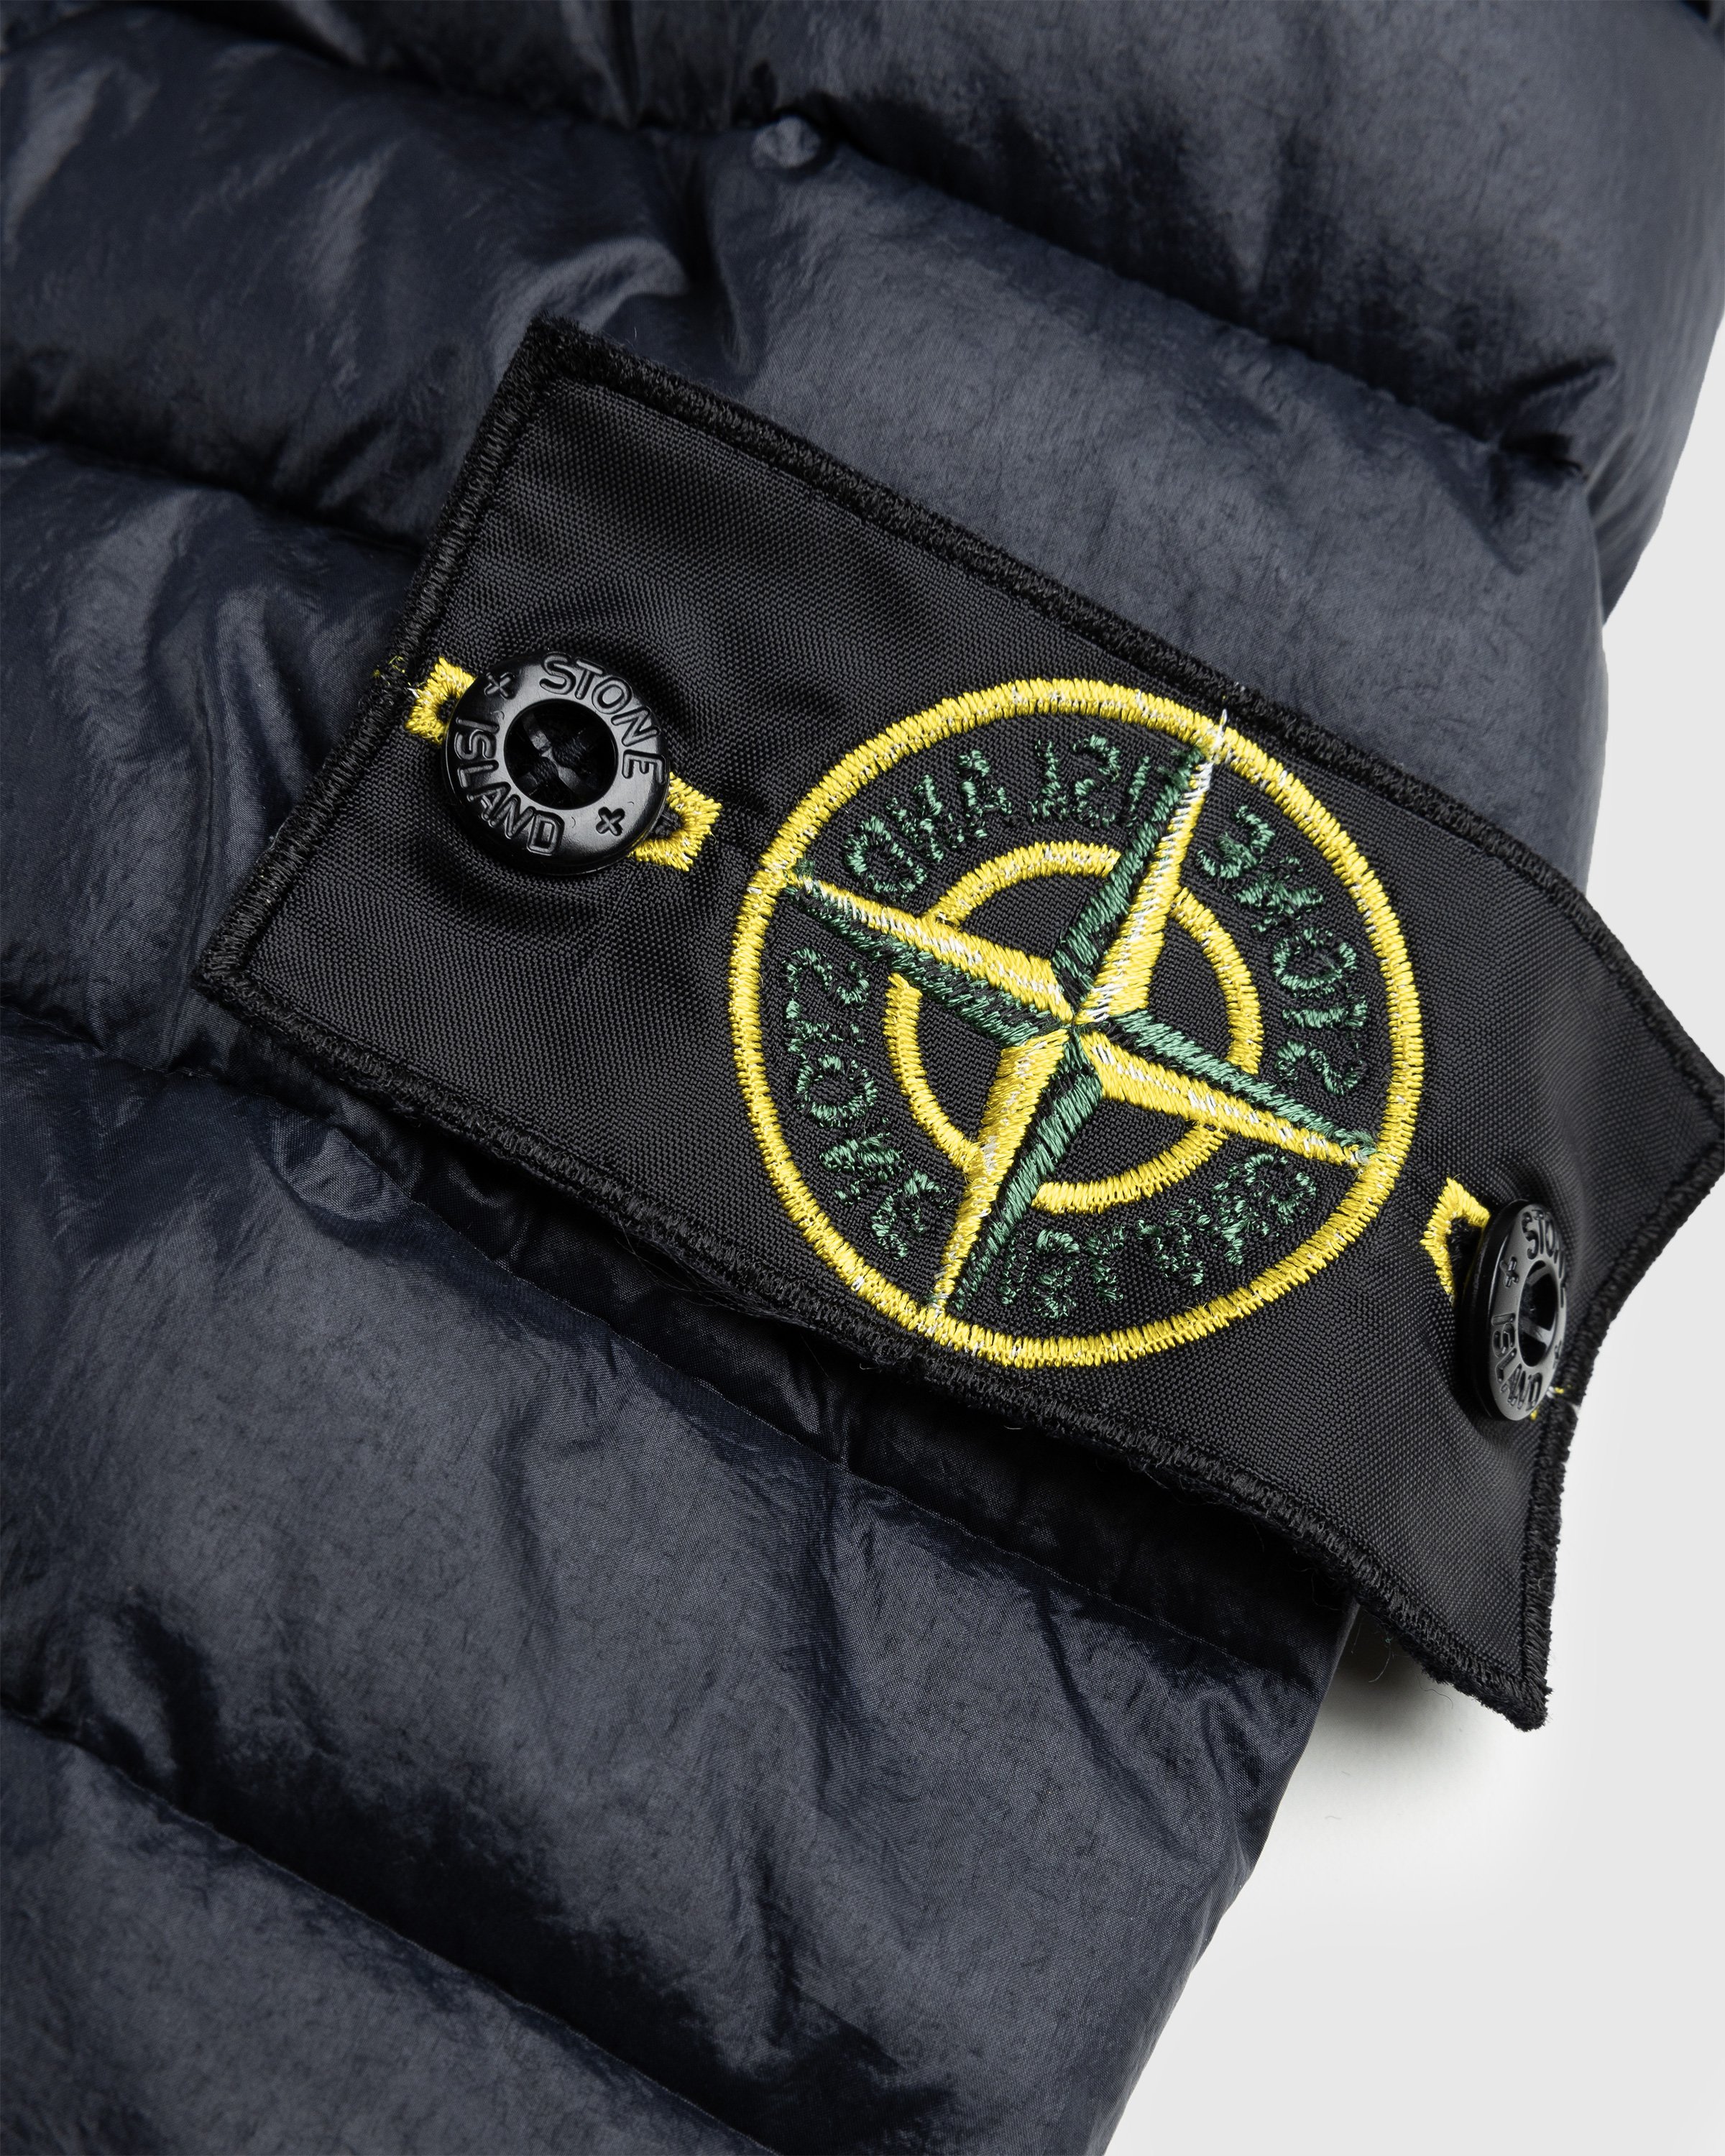 Stone Island - Packable Recycled Nylon Down Jacket Navy Blue - Clothing - Blue - Image 6